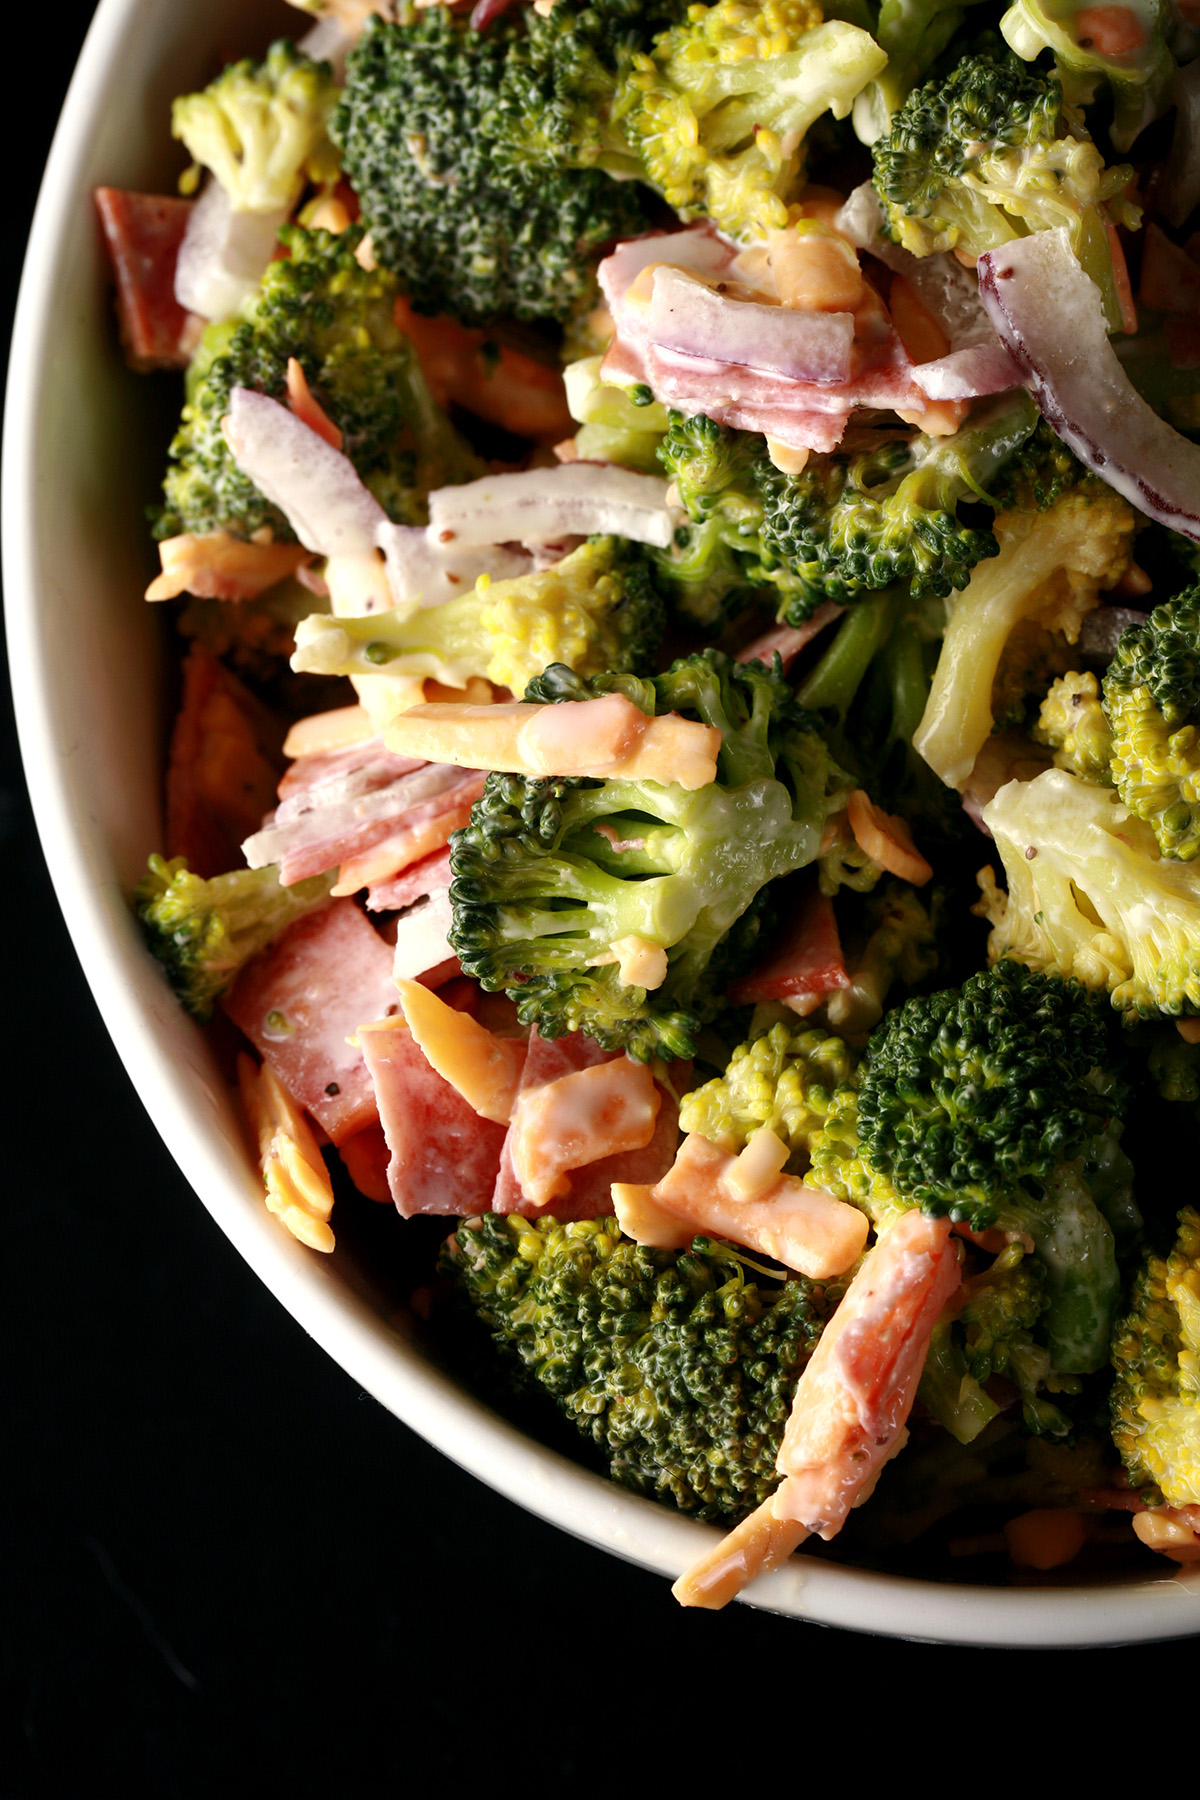 A bowl of low carb broccoli salad. Broccoli, chicken bacon, cheese, and red onion slices in a white dressing.